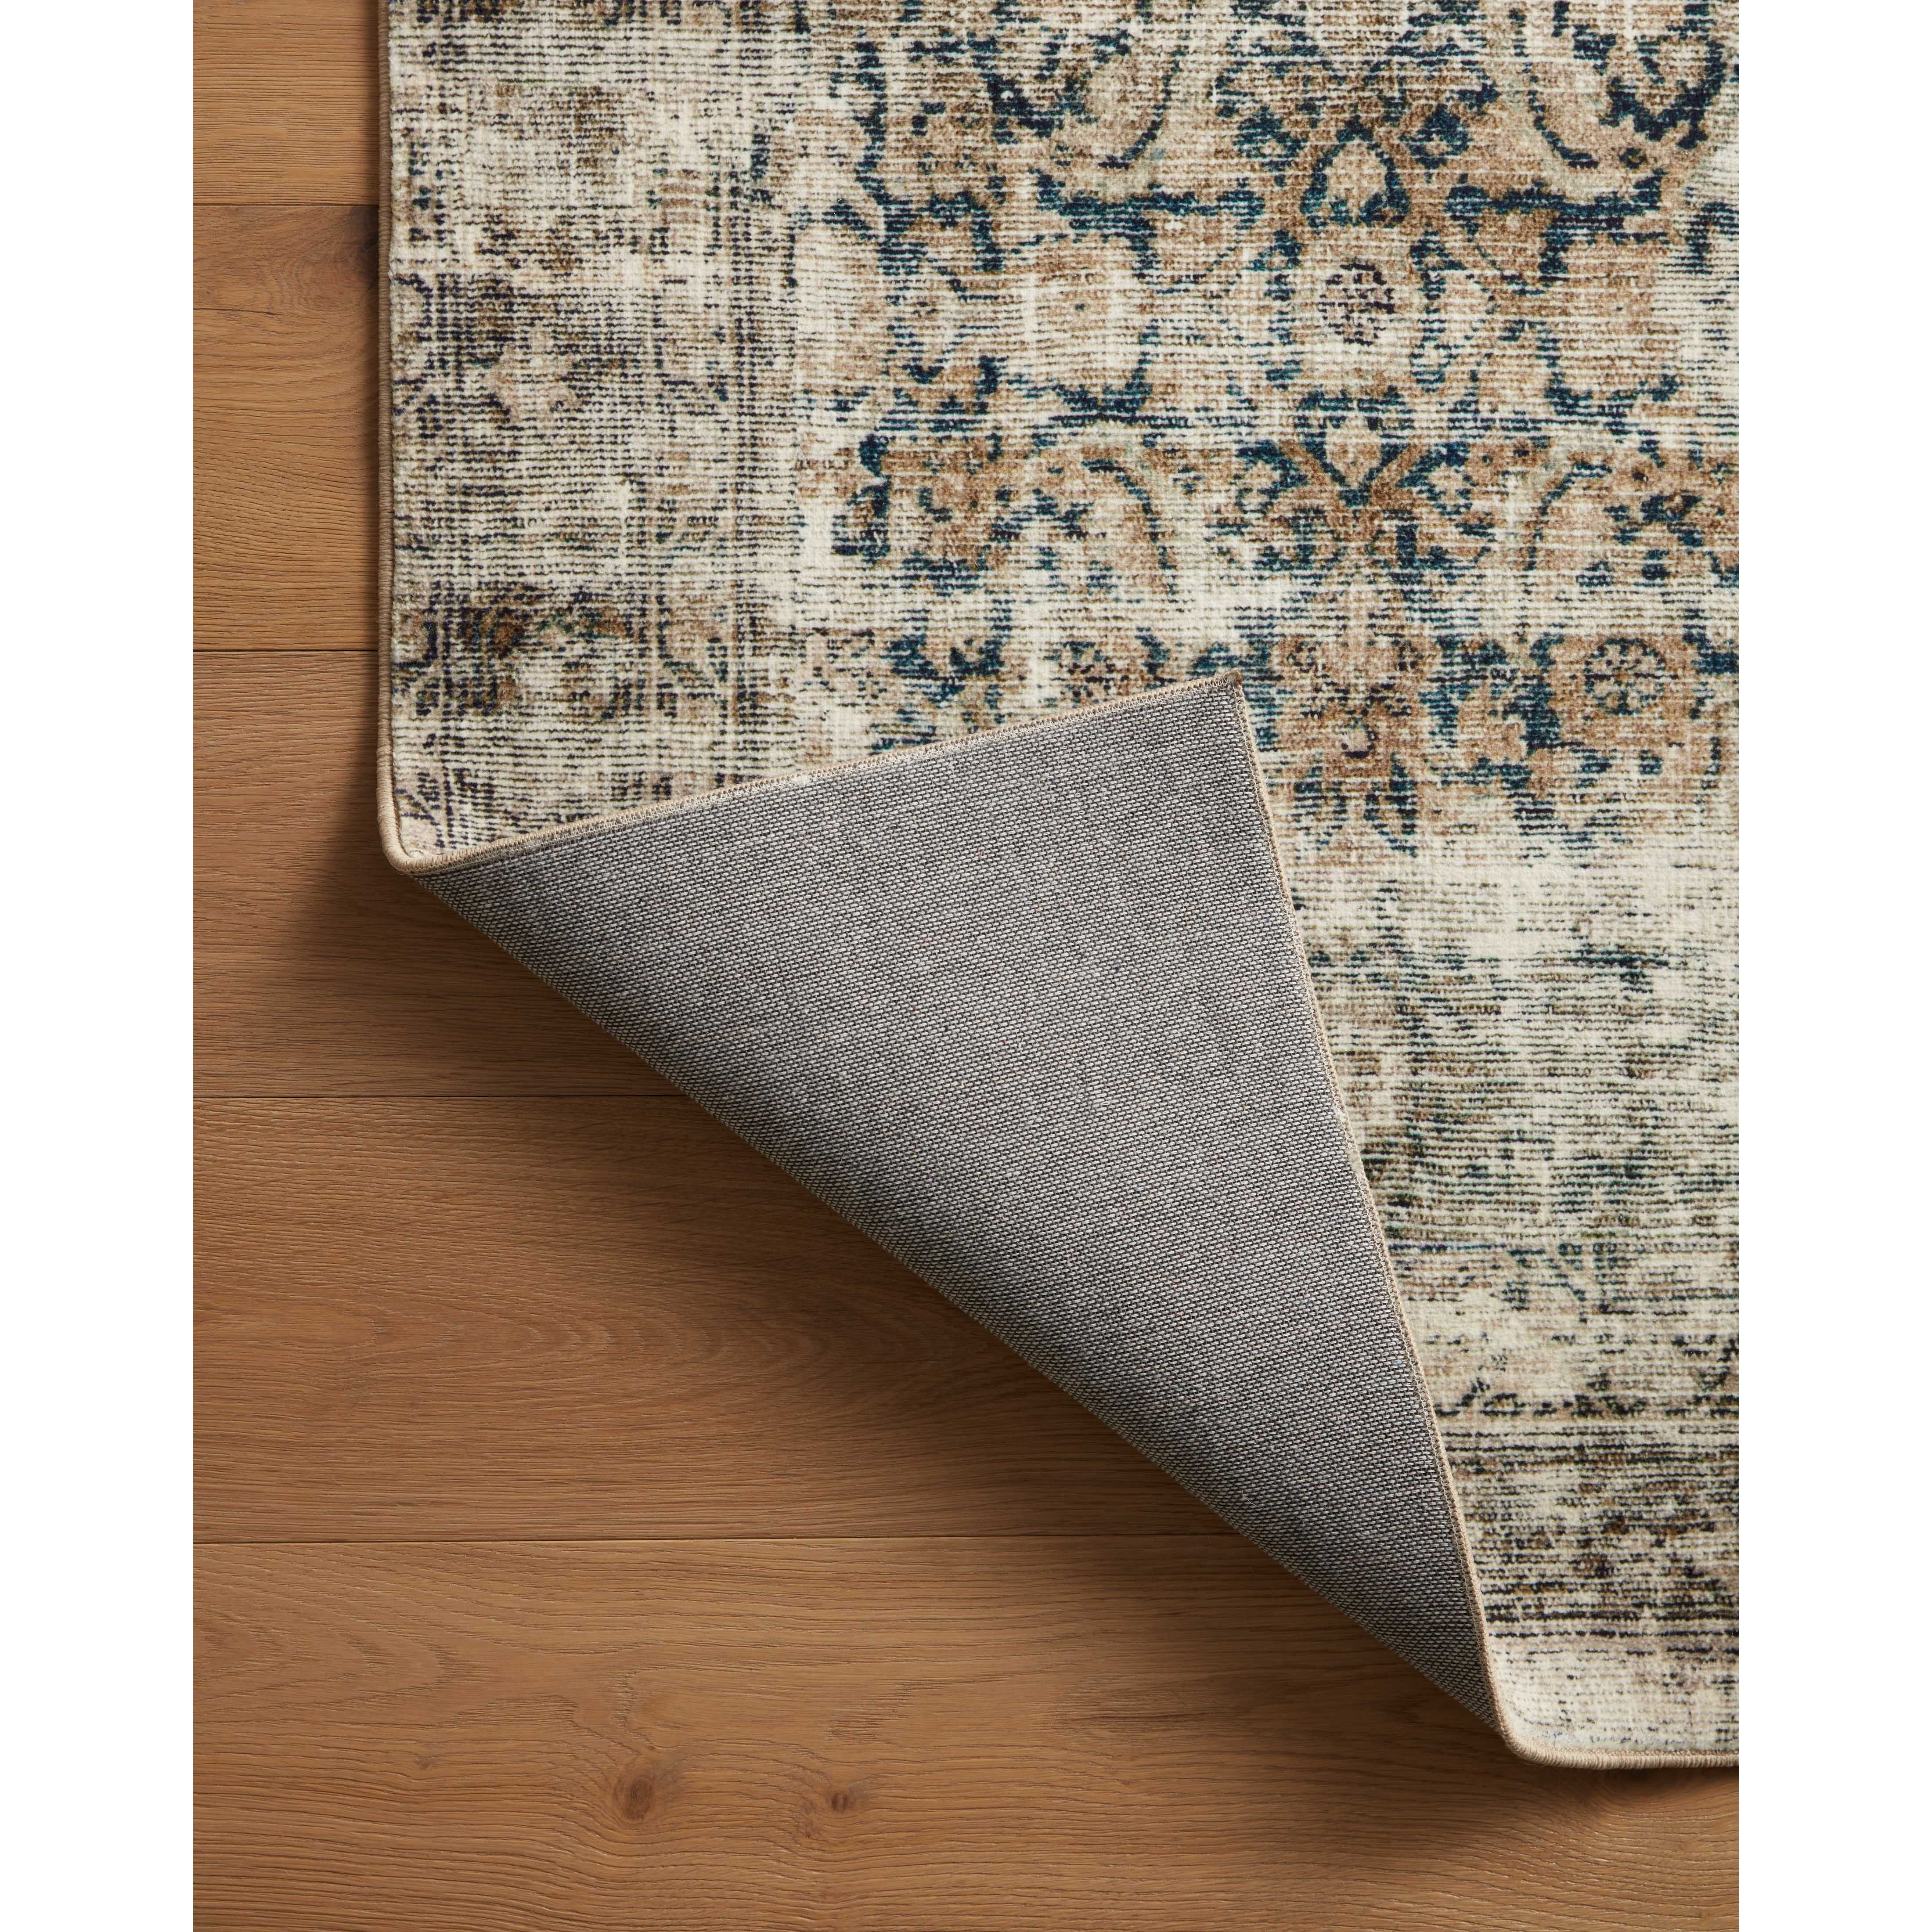 With the faded feel of an antique rug, the Amber Lewis x Loloi Morgan Navy / Sand Rug is a feat of modern printed construction. These impressive area rugs expertly blend sophisticated tones to recreate the dynamic colors of a vintage textiles. Power-loomed of CloudPile™ construction, these rugs are extra-soft to walk upon yet still durable for high-traffic rooms. Amethyst Home provides interior design services, furniture, rugs, and lighting in the Austin metro area.